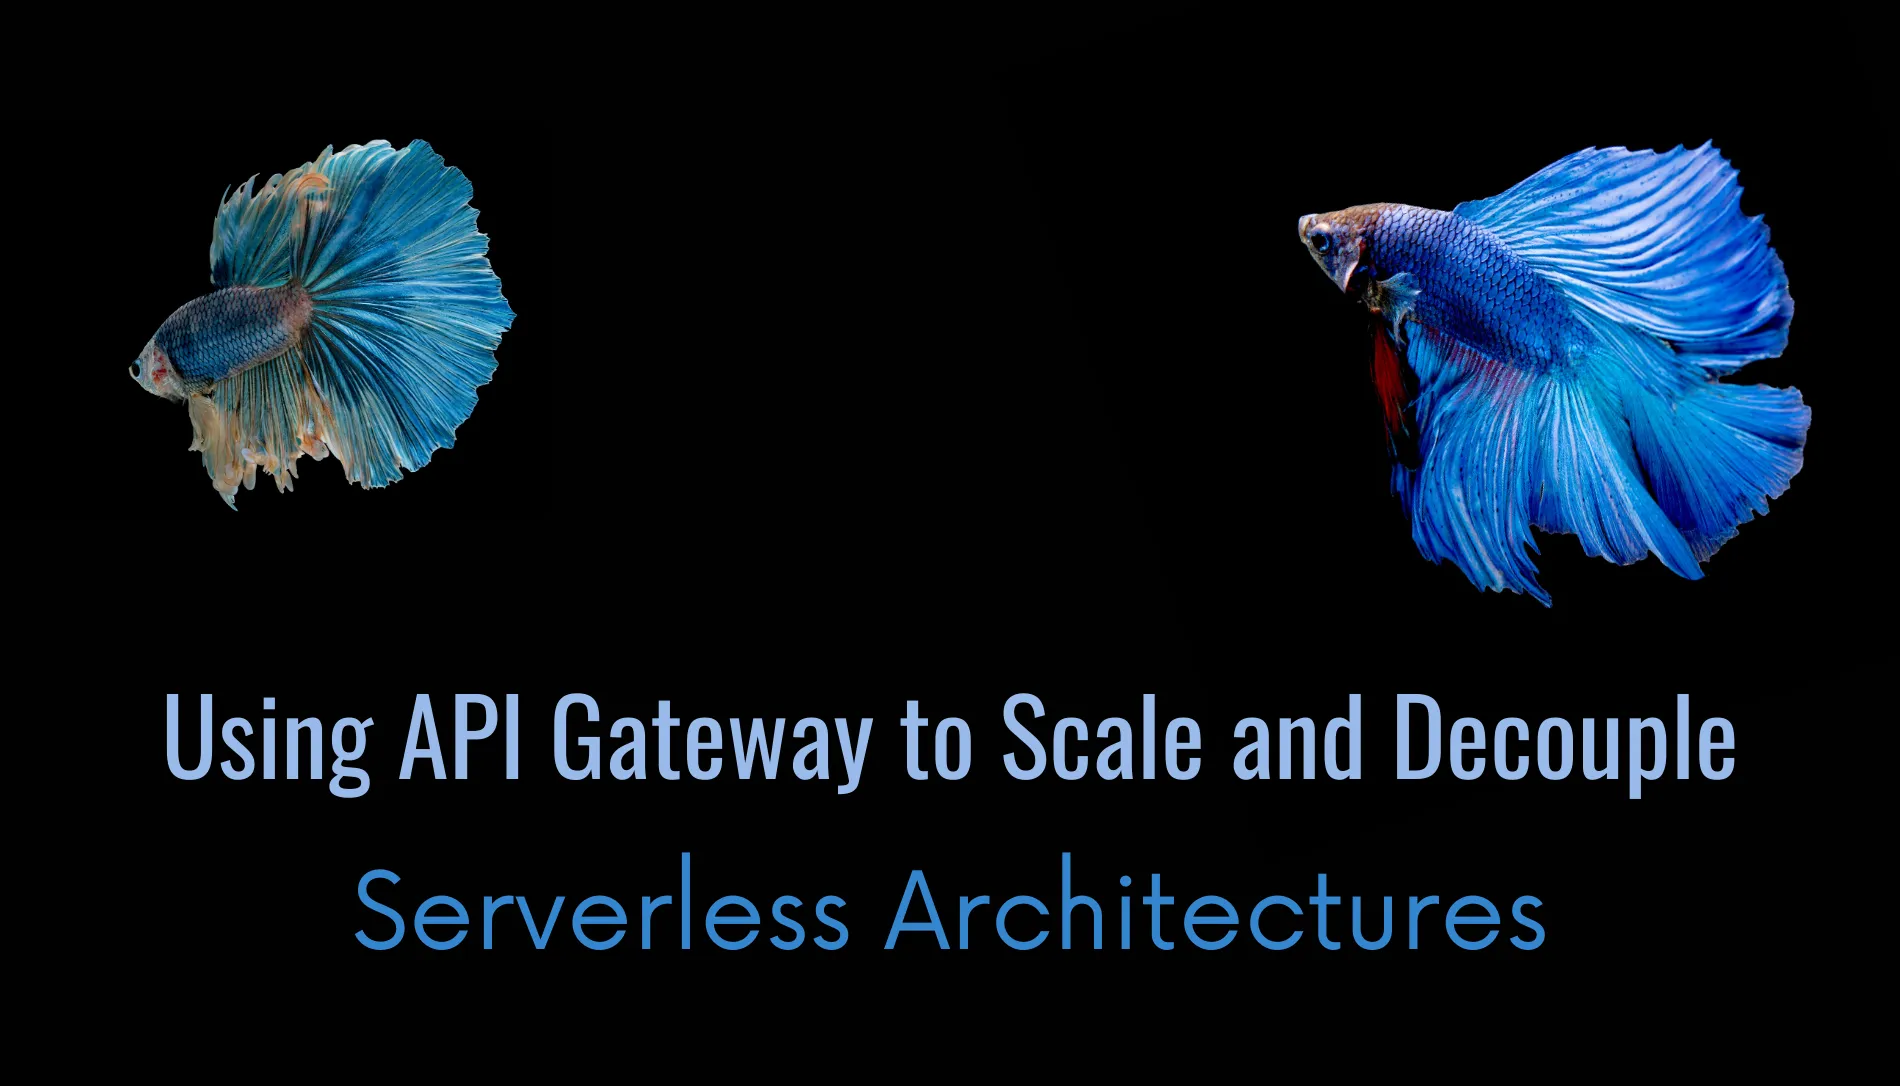 /how-to-use-amazon-api-gateway-to-decouple-and-scale-serverless-architectures-4c1y3u1z feature image